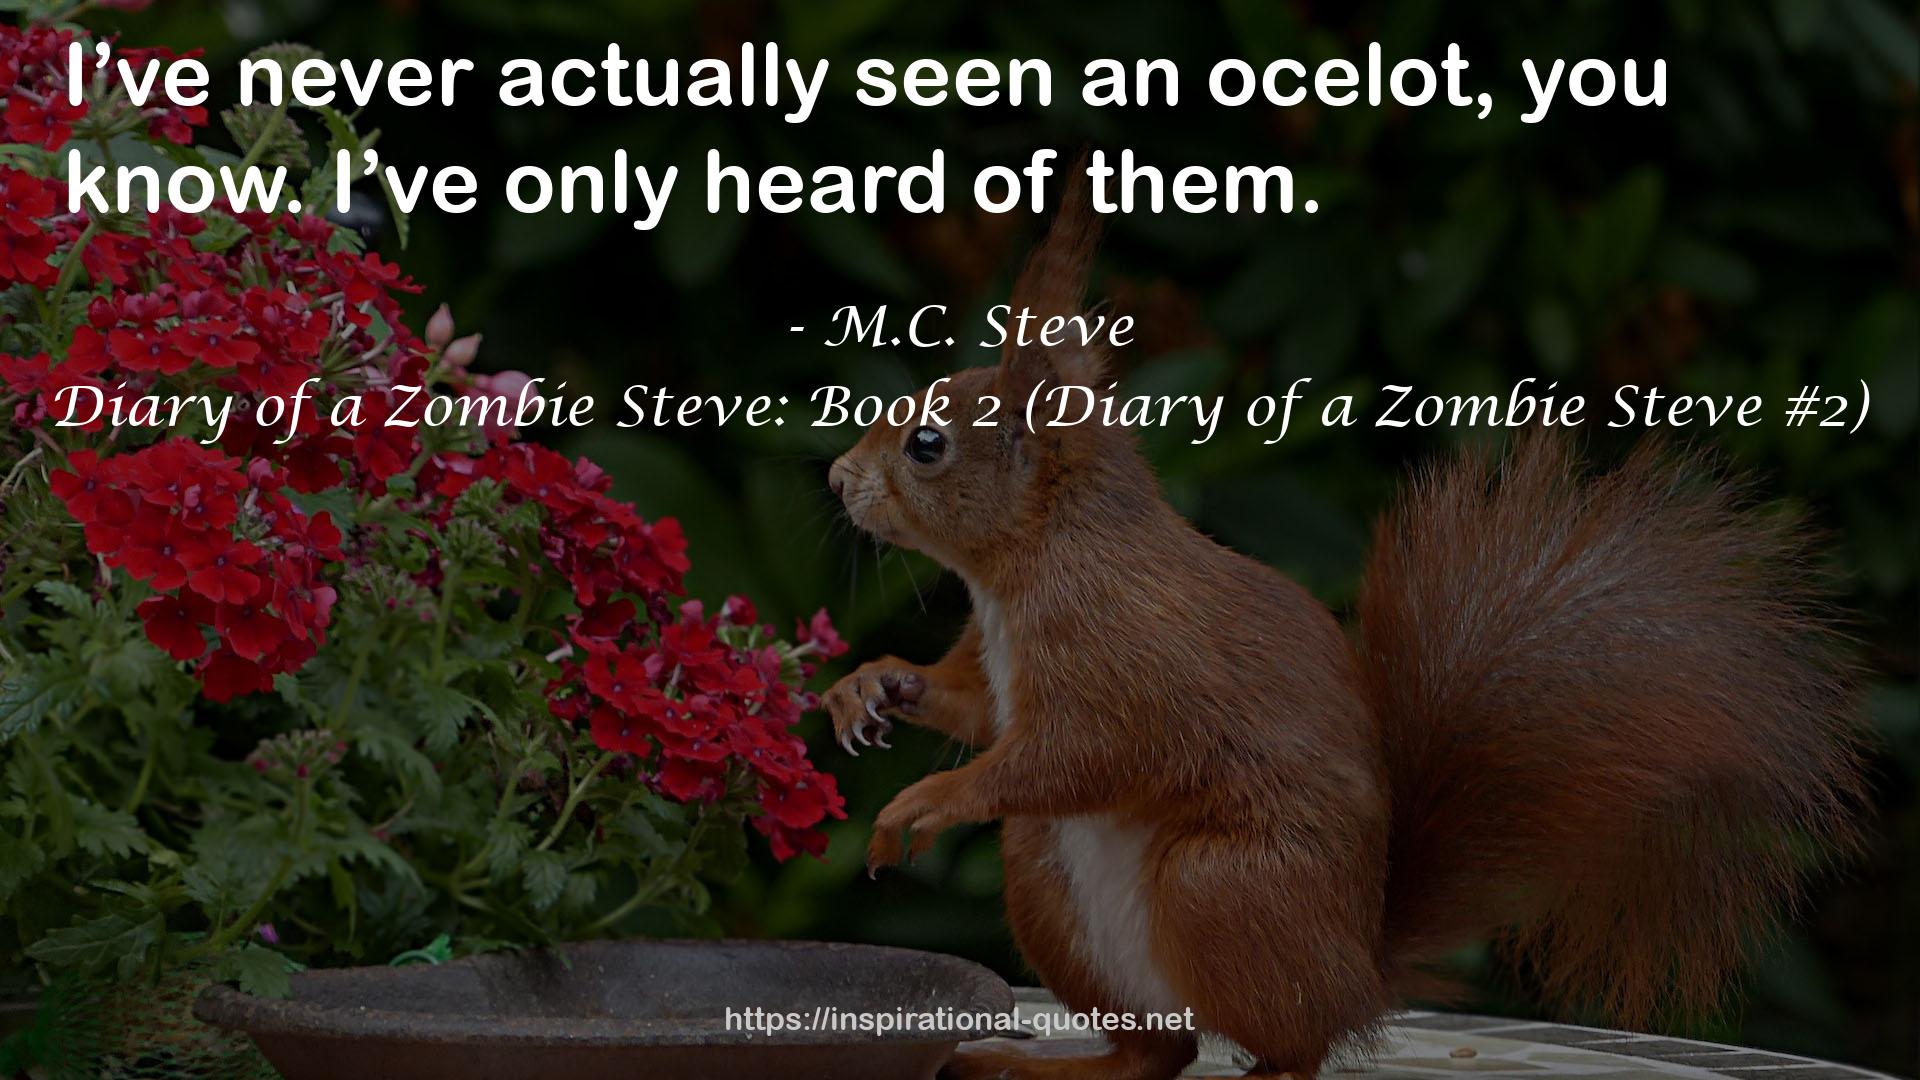 Diary of a Zombie Steve: Book 2 (Diary of a Zombie Steve #2) QUOTES